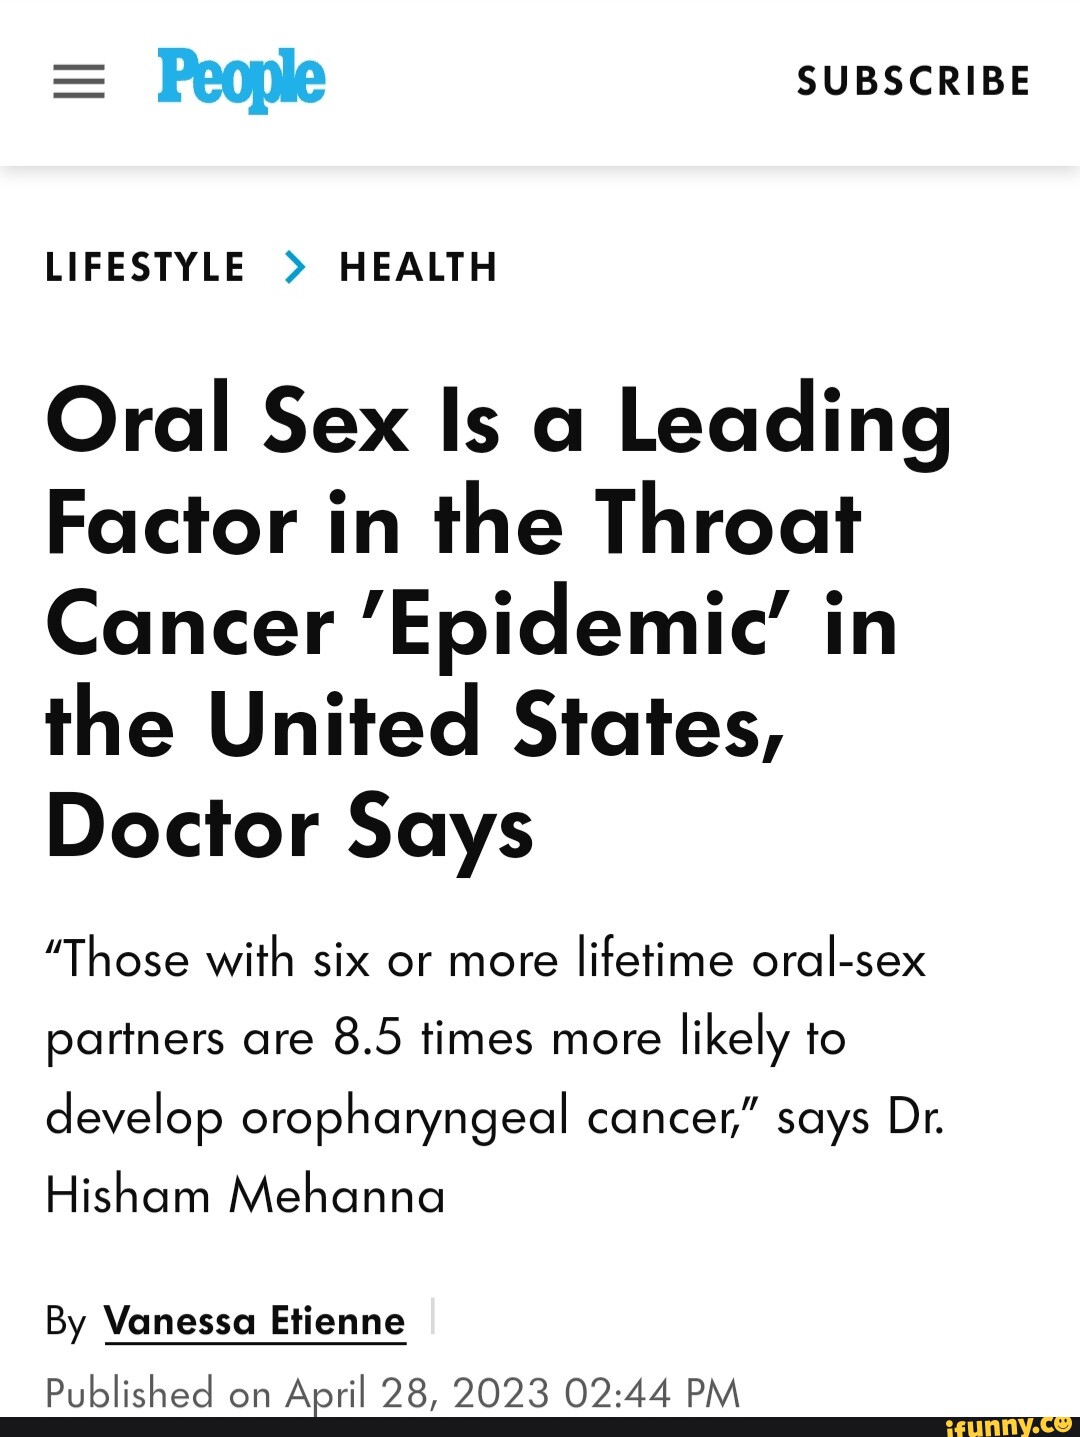 People Subscribe Lifestyle Health Oral Sex Is A Leading Factor In The Throat Cancer Epidemic 9358